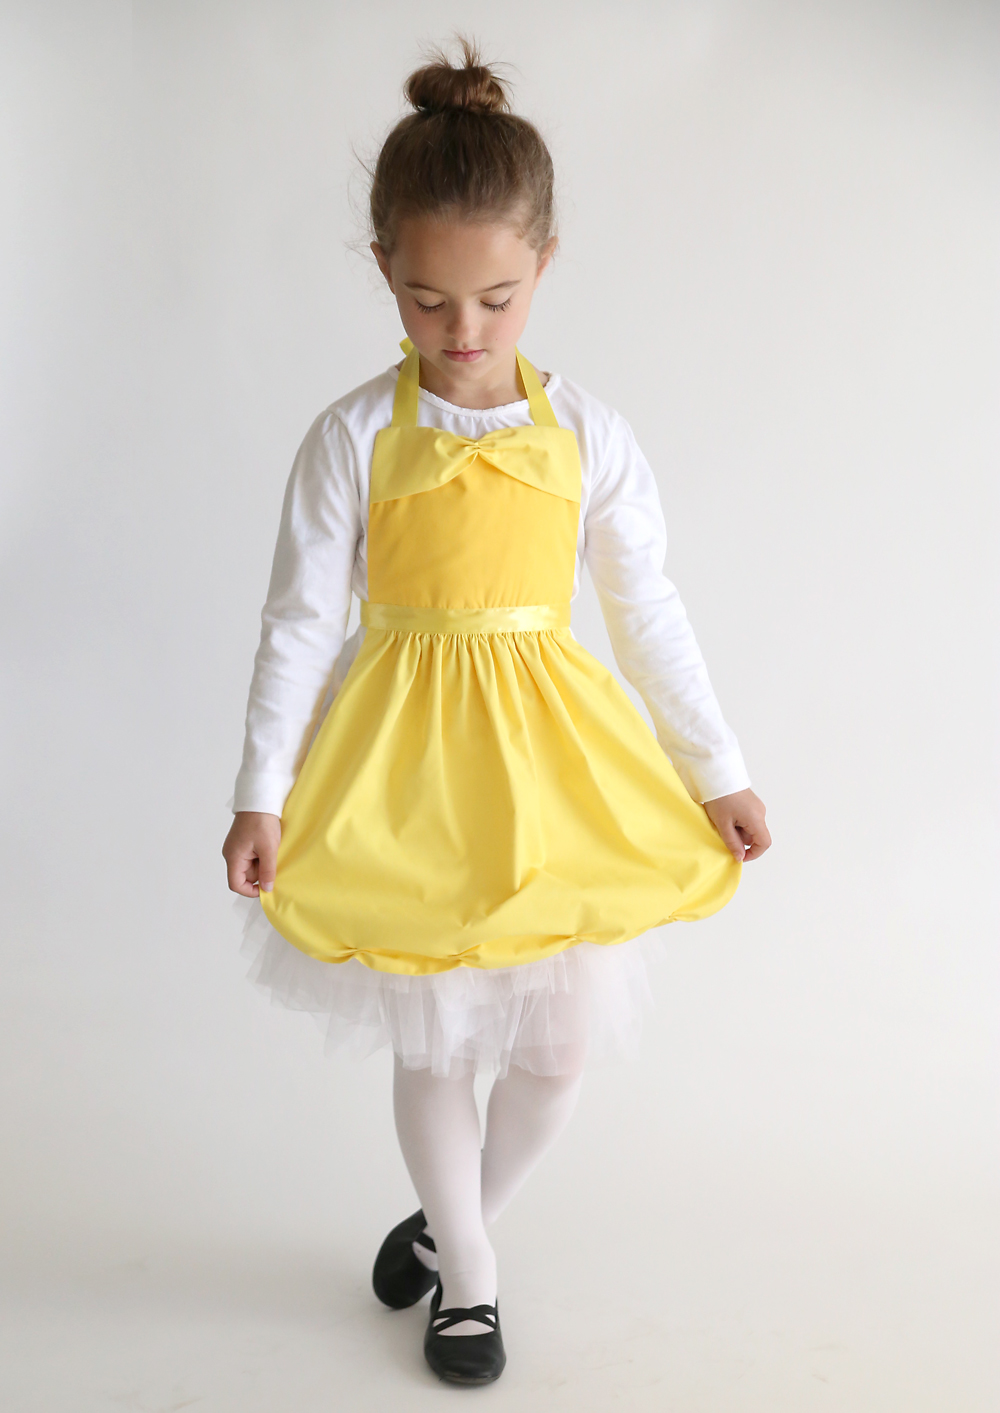 A little girl wearing a Belle dress up costume made from a free pdf sewing pattern